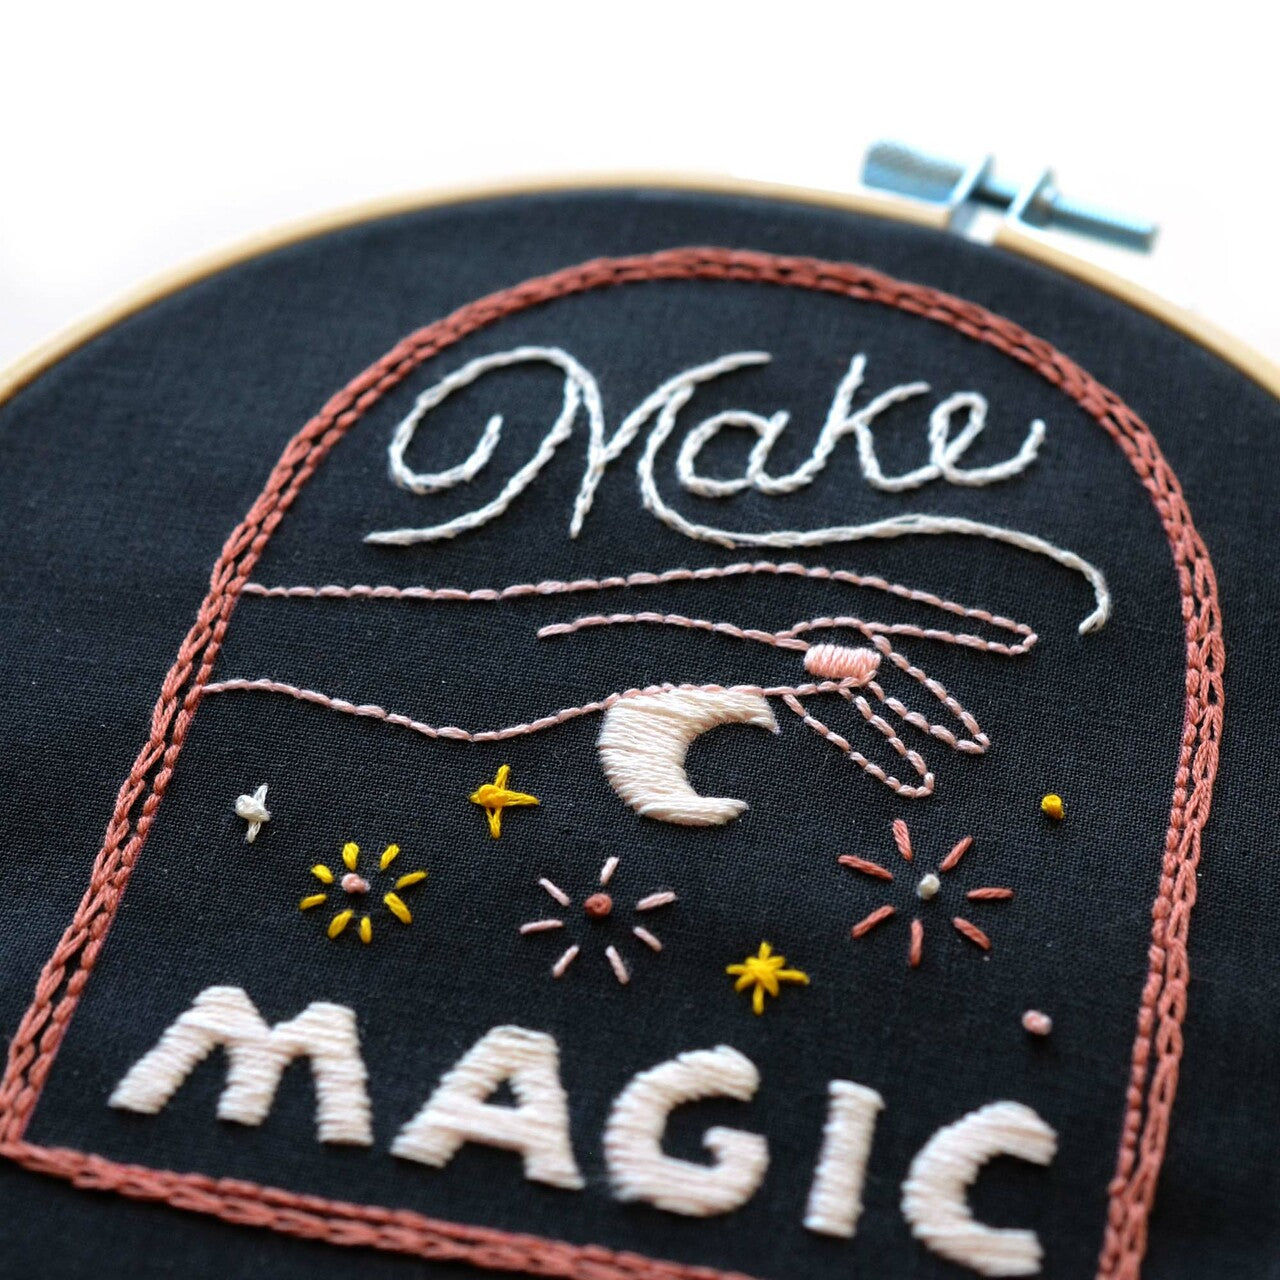 Make Magic DIY Embroidery Patch Kit